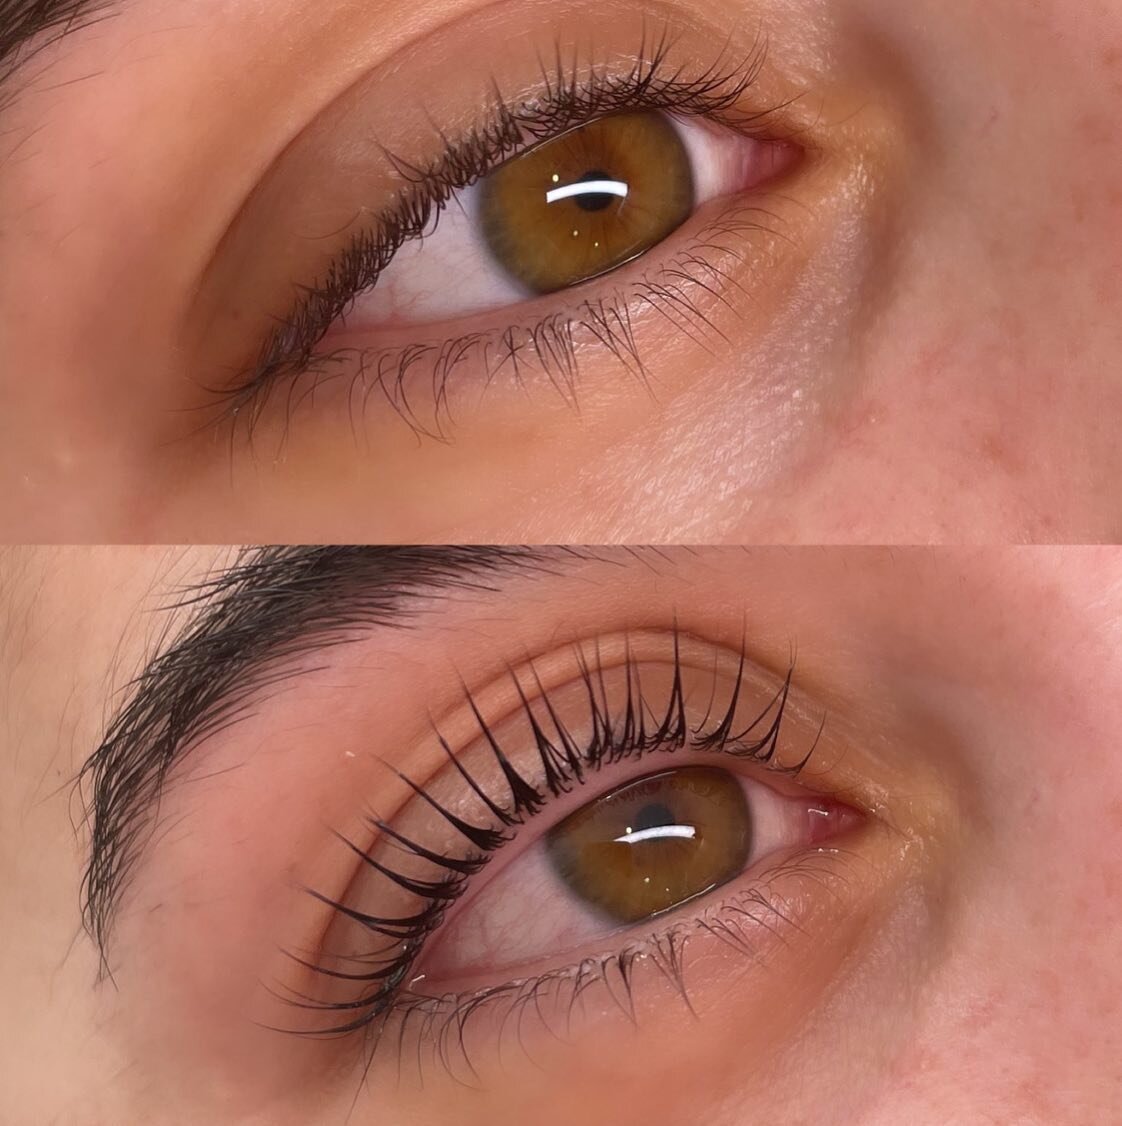 YUMI lashes - the lowdown 👩🏻&zwj;🔬💚

Designed to boost and lift your natural lash. 

Instead of a traditional perm that simply curves your lashes, Yumi lifts turn the lashes upwards, gives them length, height and volume. This process is personali